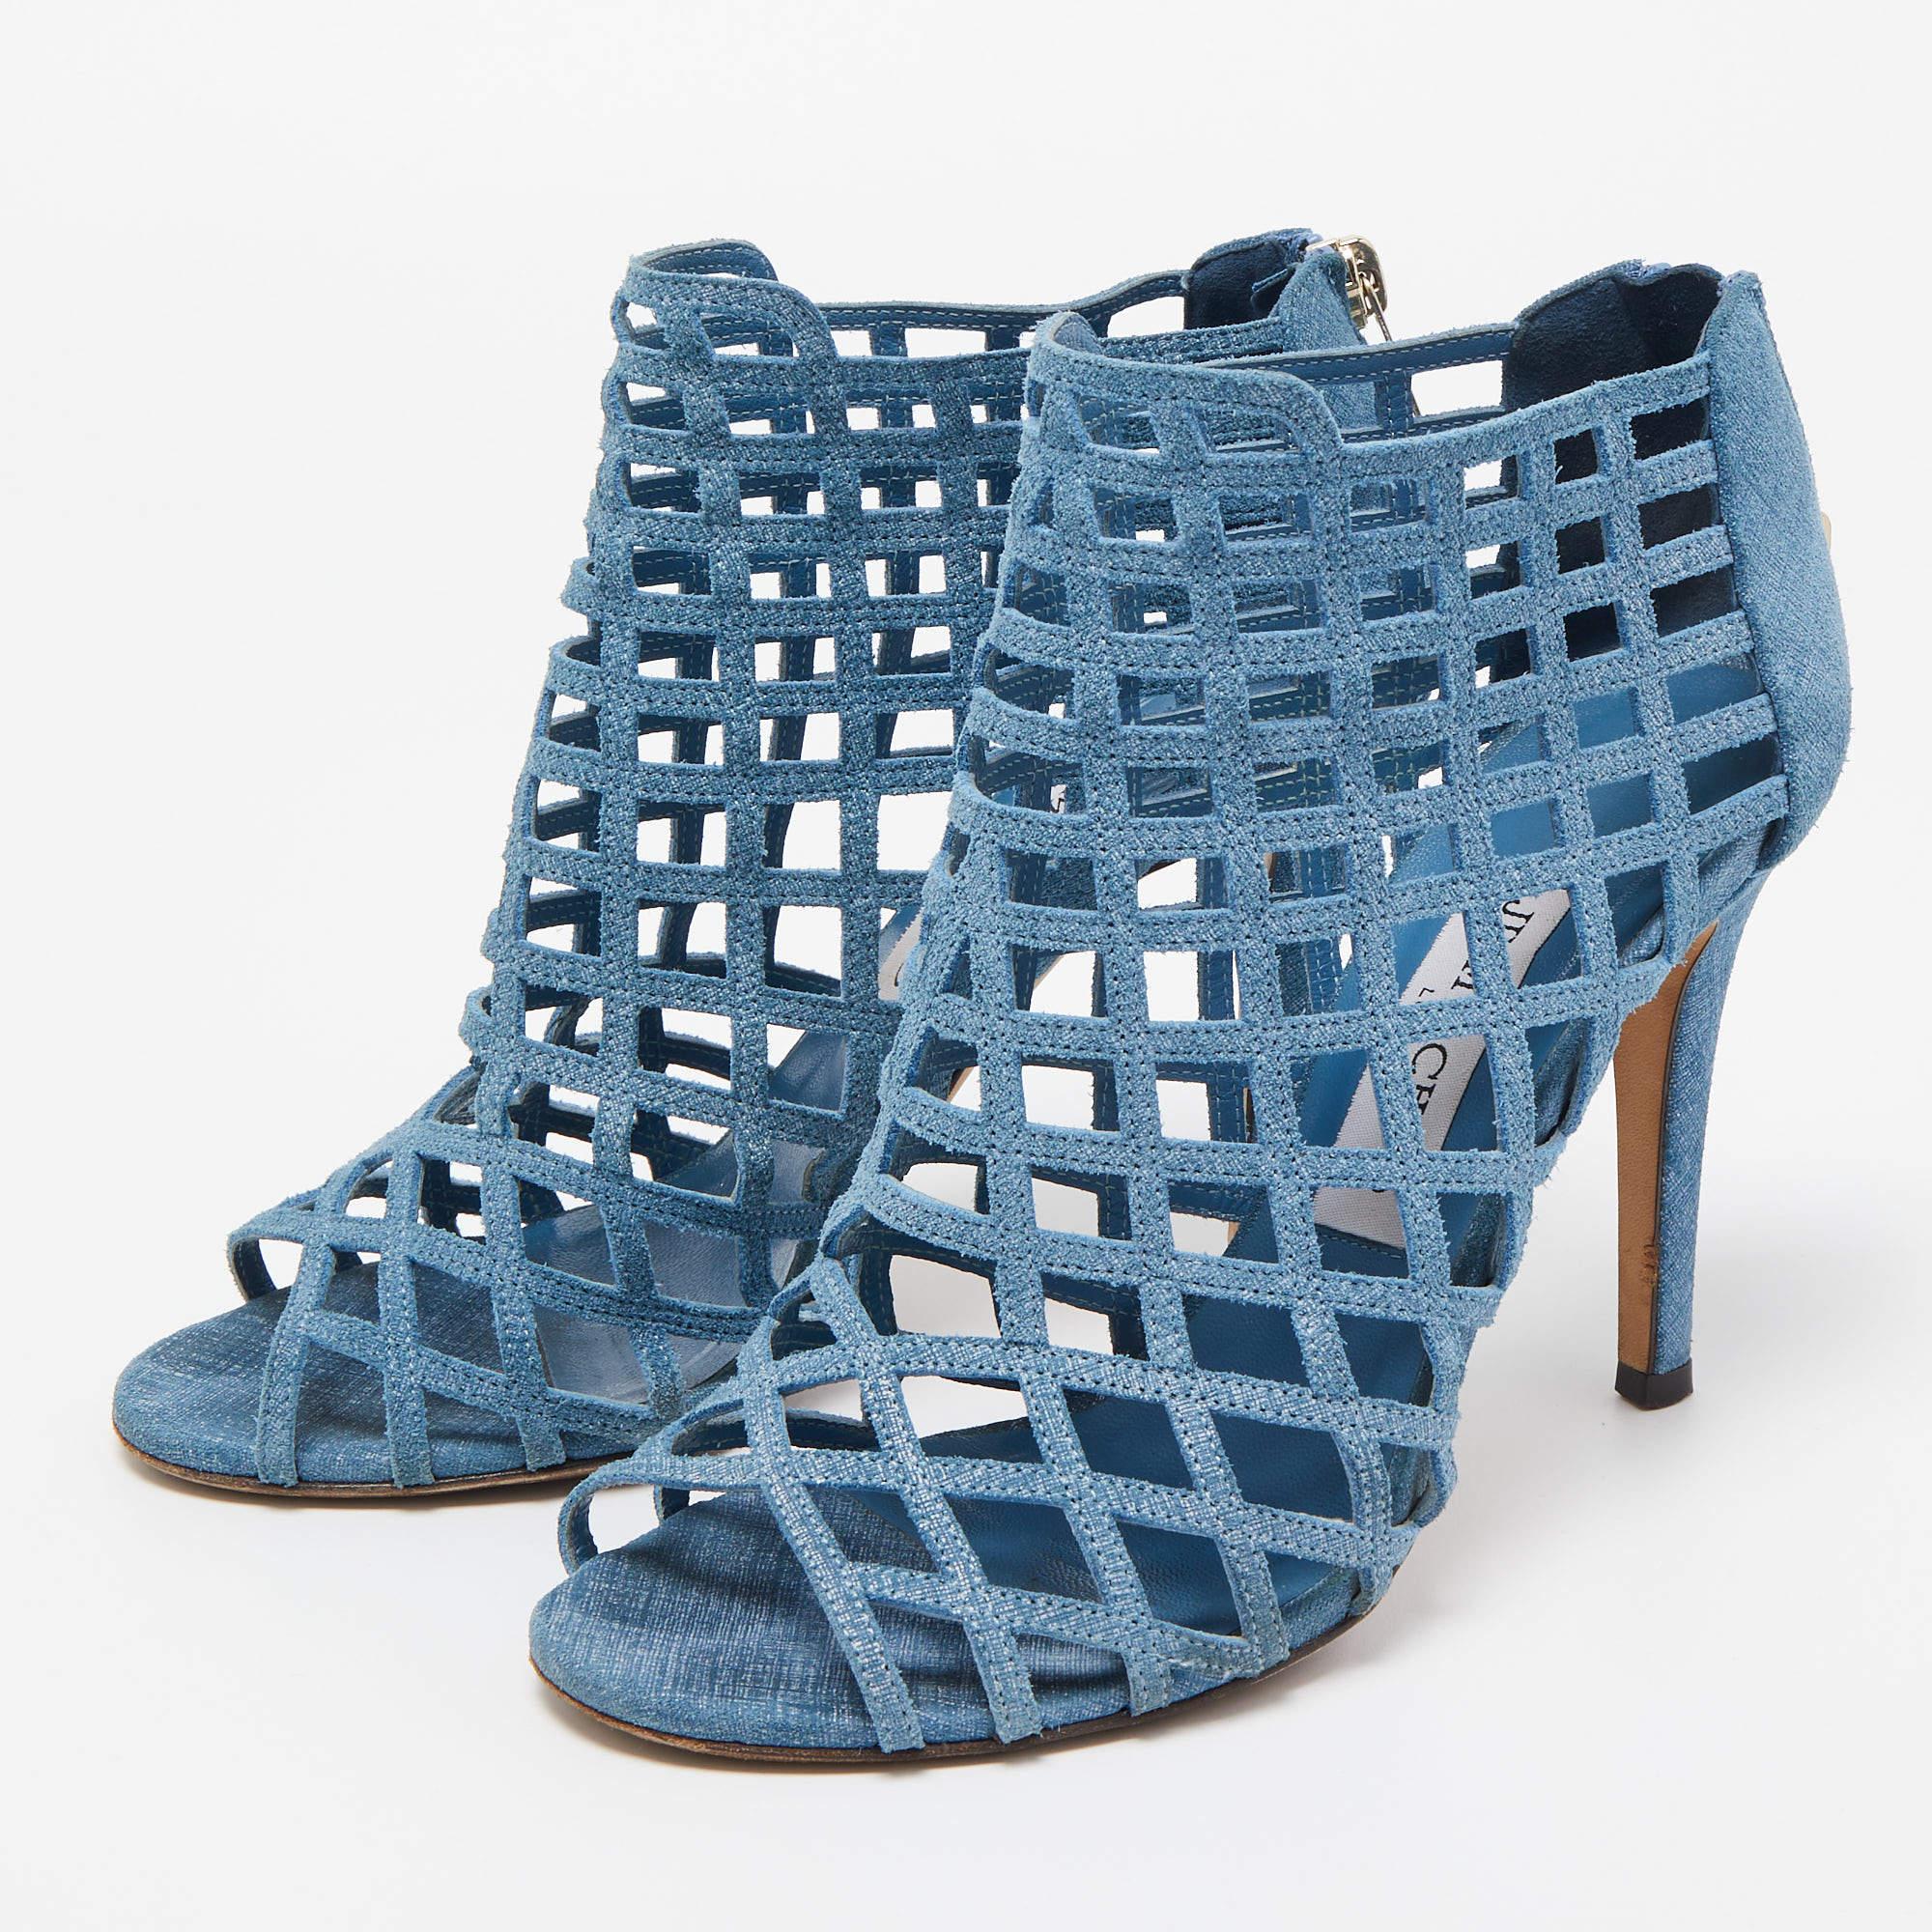 Jimmy Choo's Dassa ankle booties are designed to elegantly frame the feet. Crafted from textured suede, the boots feature a cage-like design all over, peep-toes, and 10cm heels. The refreshing shade of blue makes it a notice-worthy pair.

